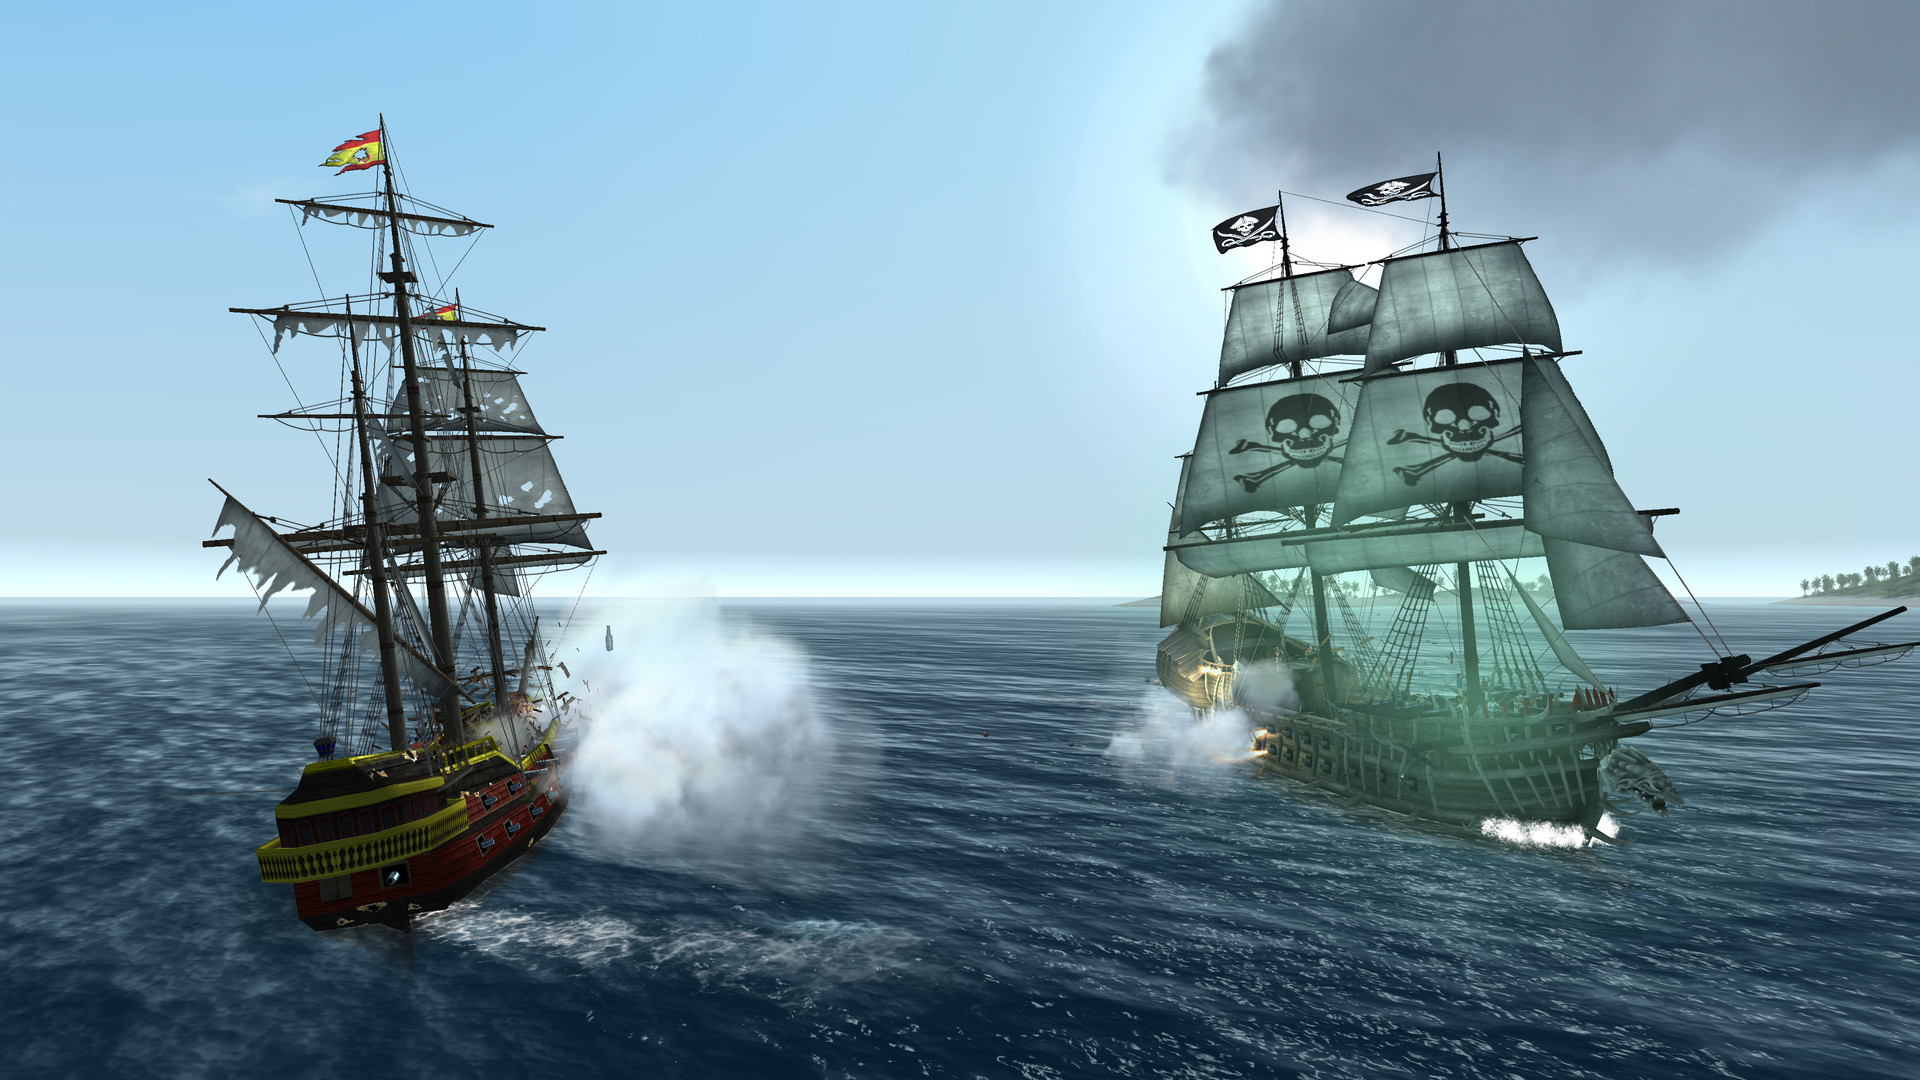 the pirate plague of the dead ship with supplies flag